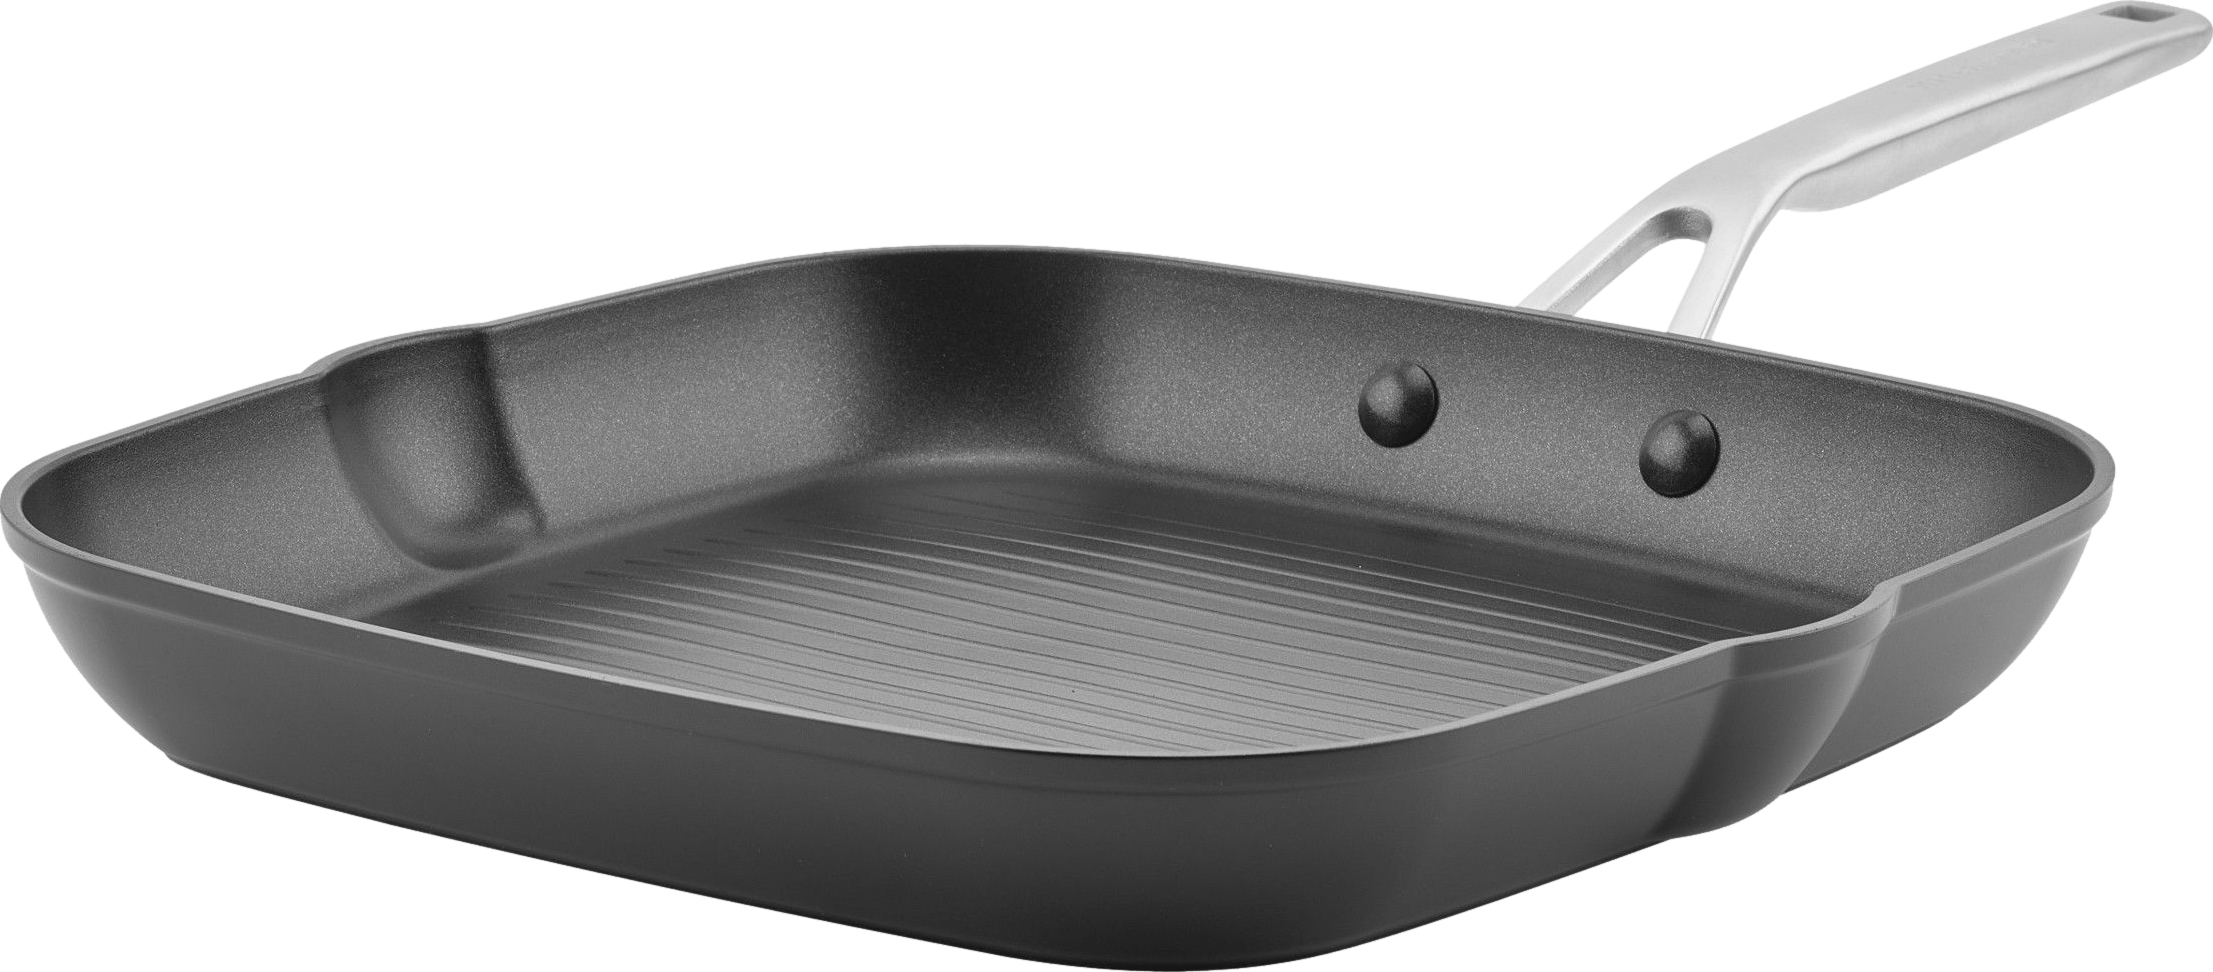 KitchenAid Hard-Anodized Induction Nonstick Square Grill Pan, 11.25-Inch,  Matte Black